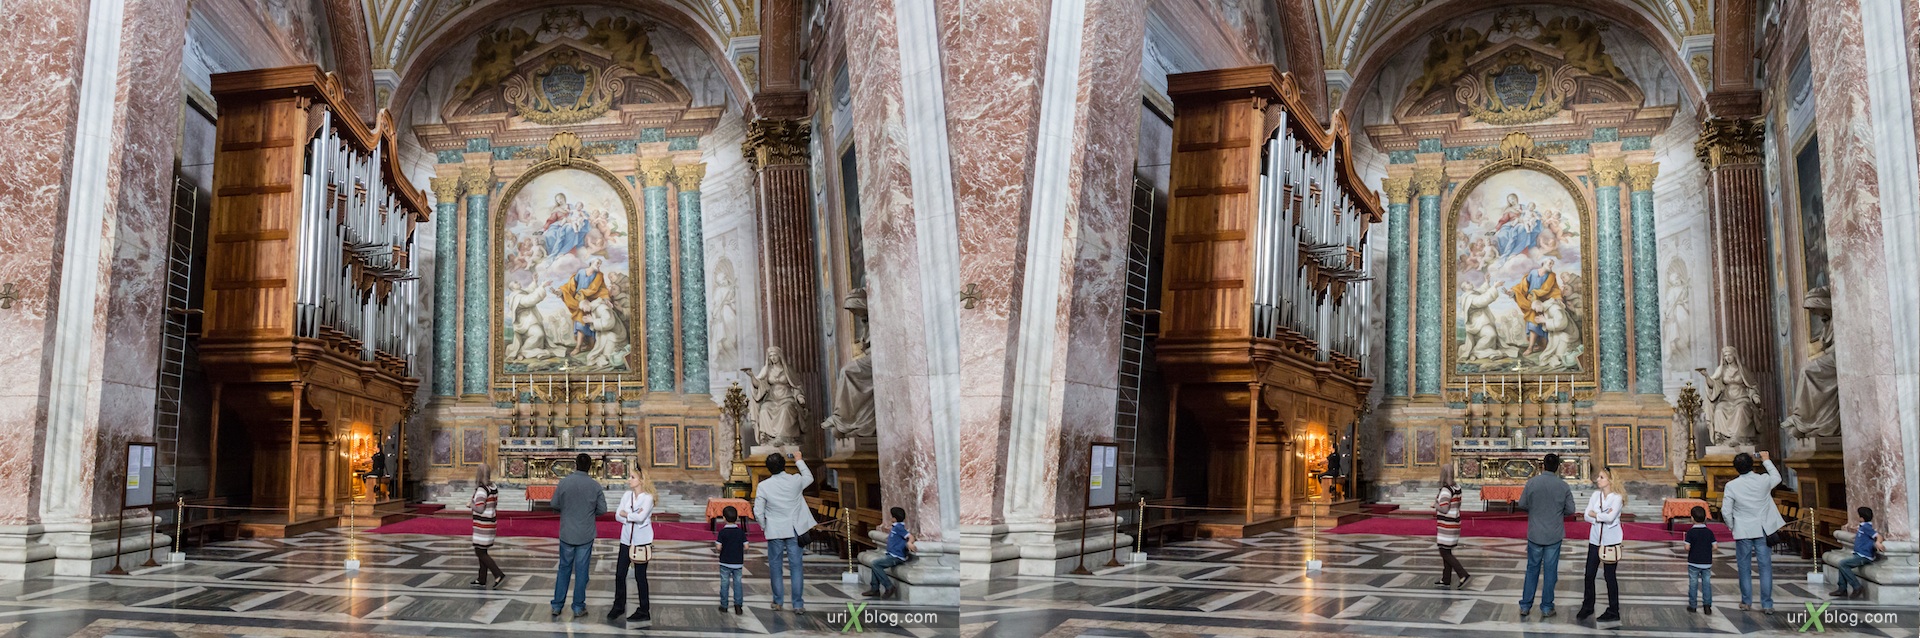 2012, Santa Maria degli Angeli church, Rome, Italy, cathedral, monastery, Christianity, Catholicism, 3D, stereo pair, cross-eyed, crossview, cross view stereo pair